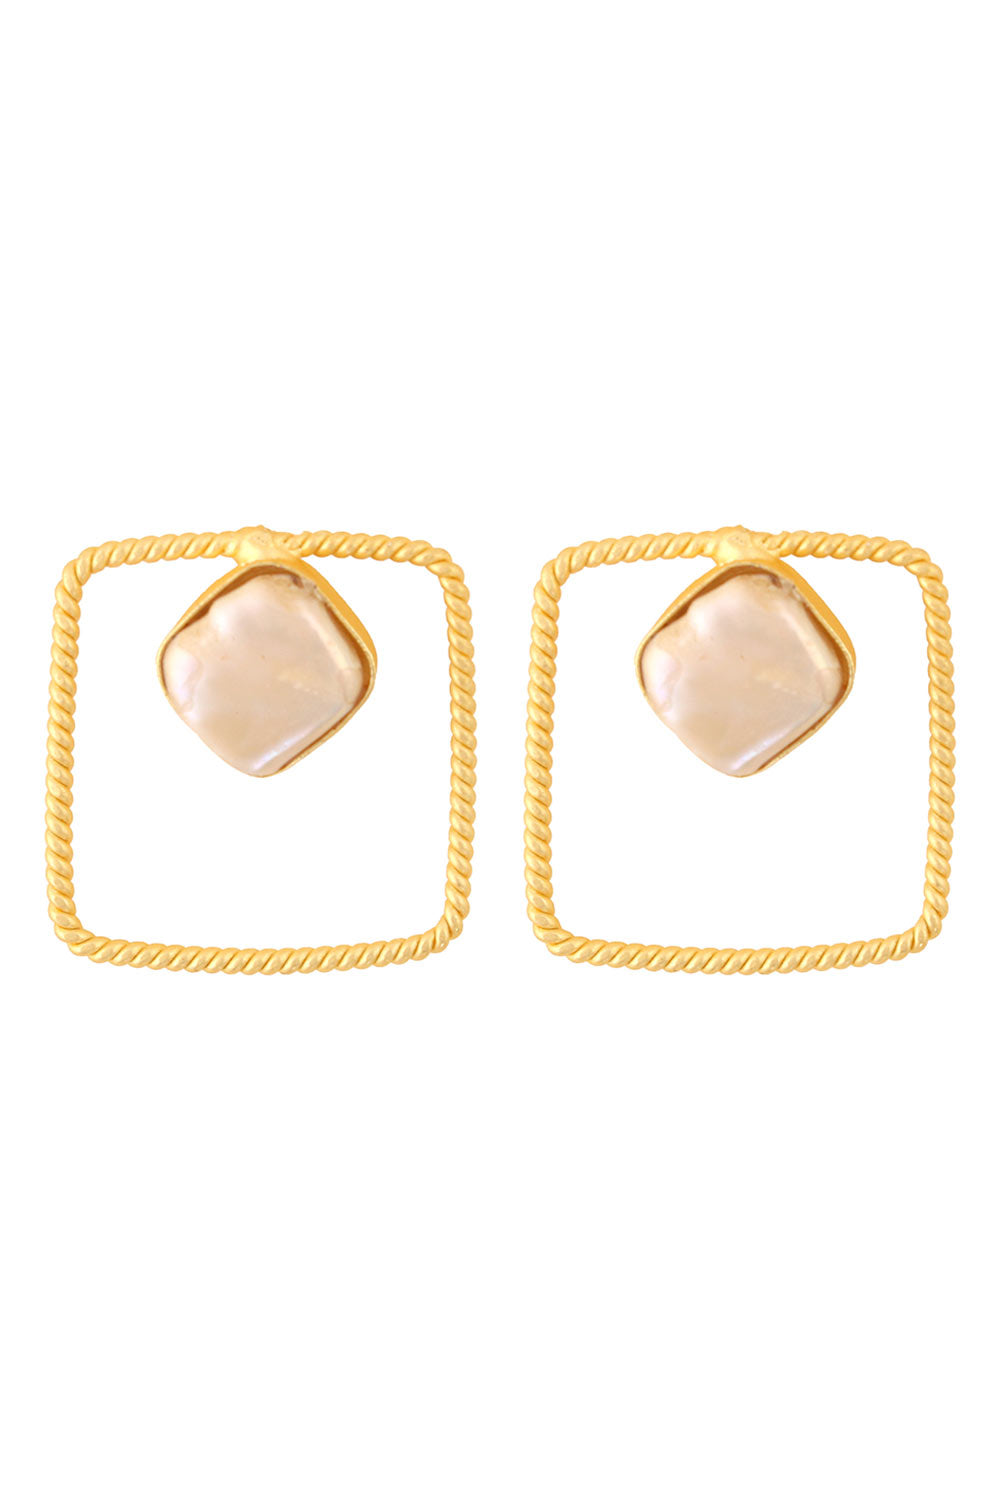 Buy Lainie Gold-Plated Contemporary Baroque Earrings Online - Zoom In